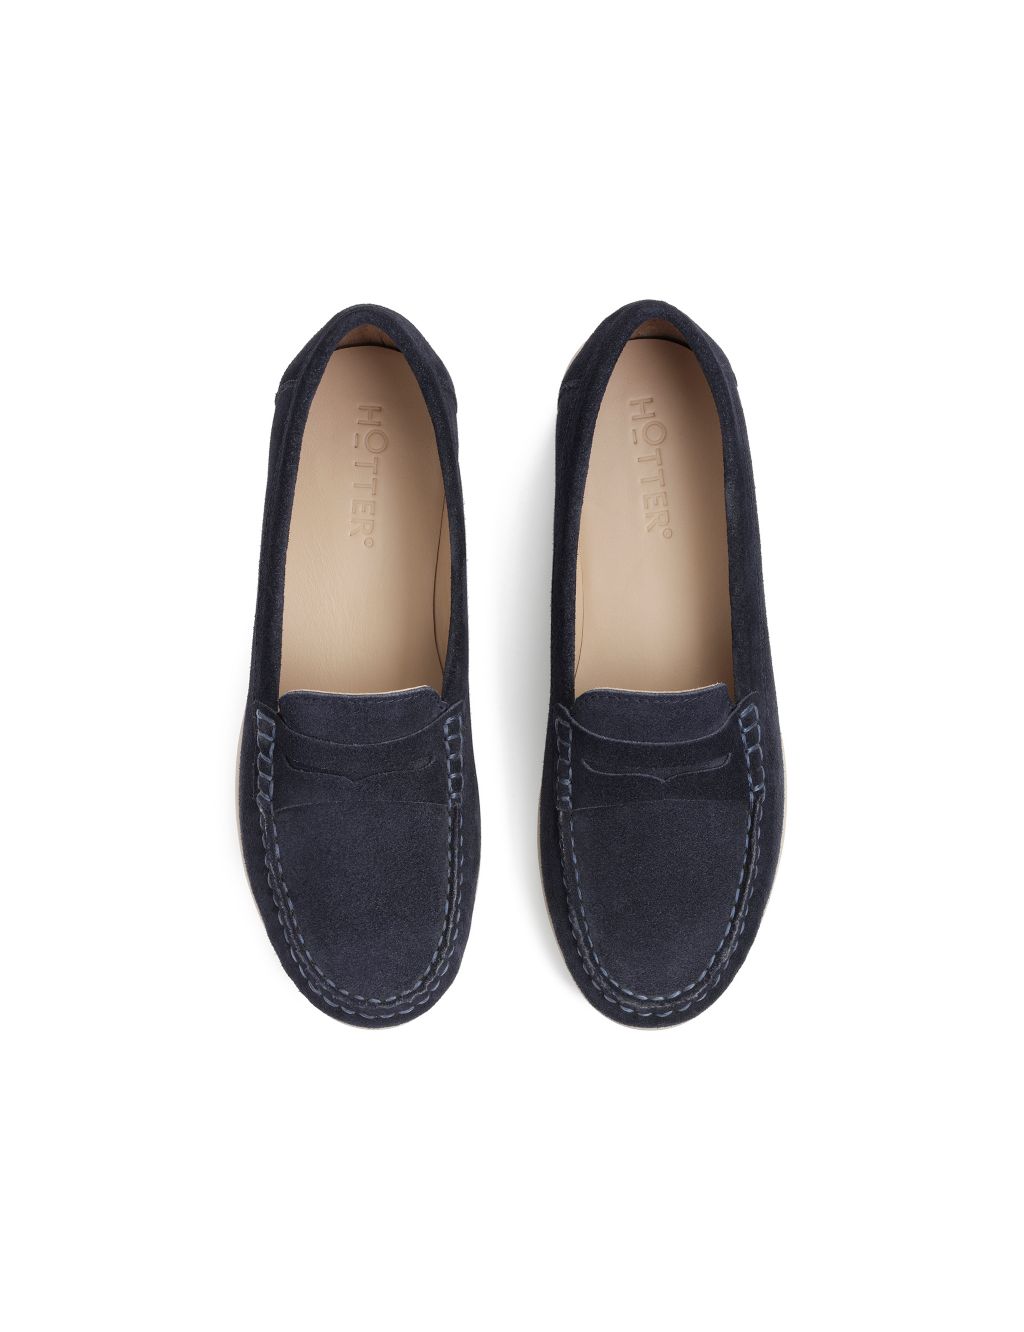 Pier Suede Flat Loafers image 2